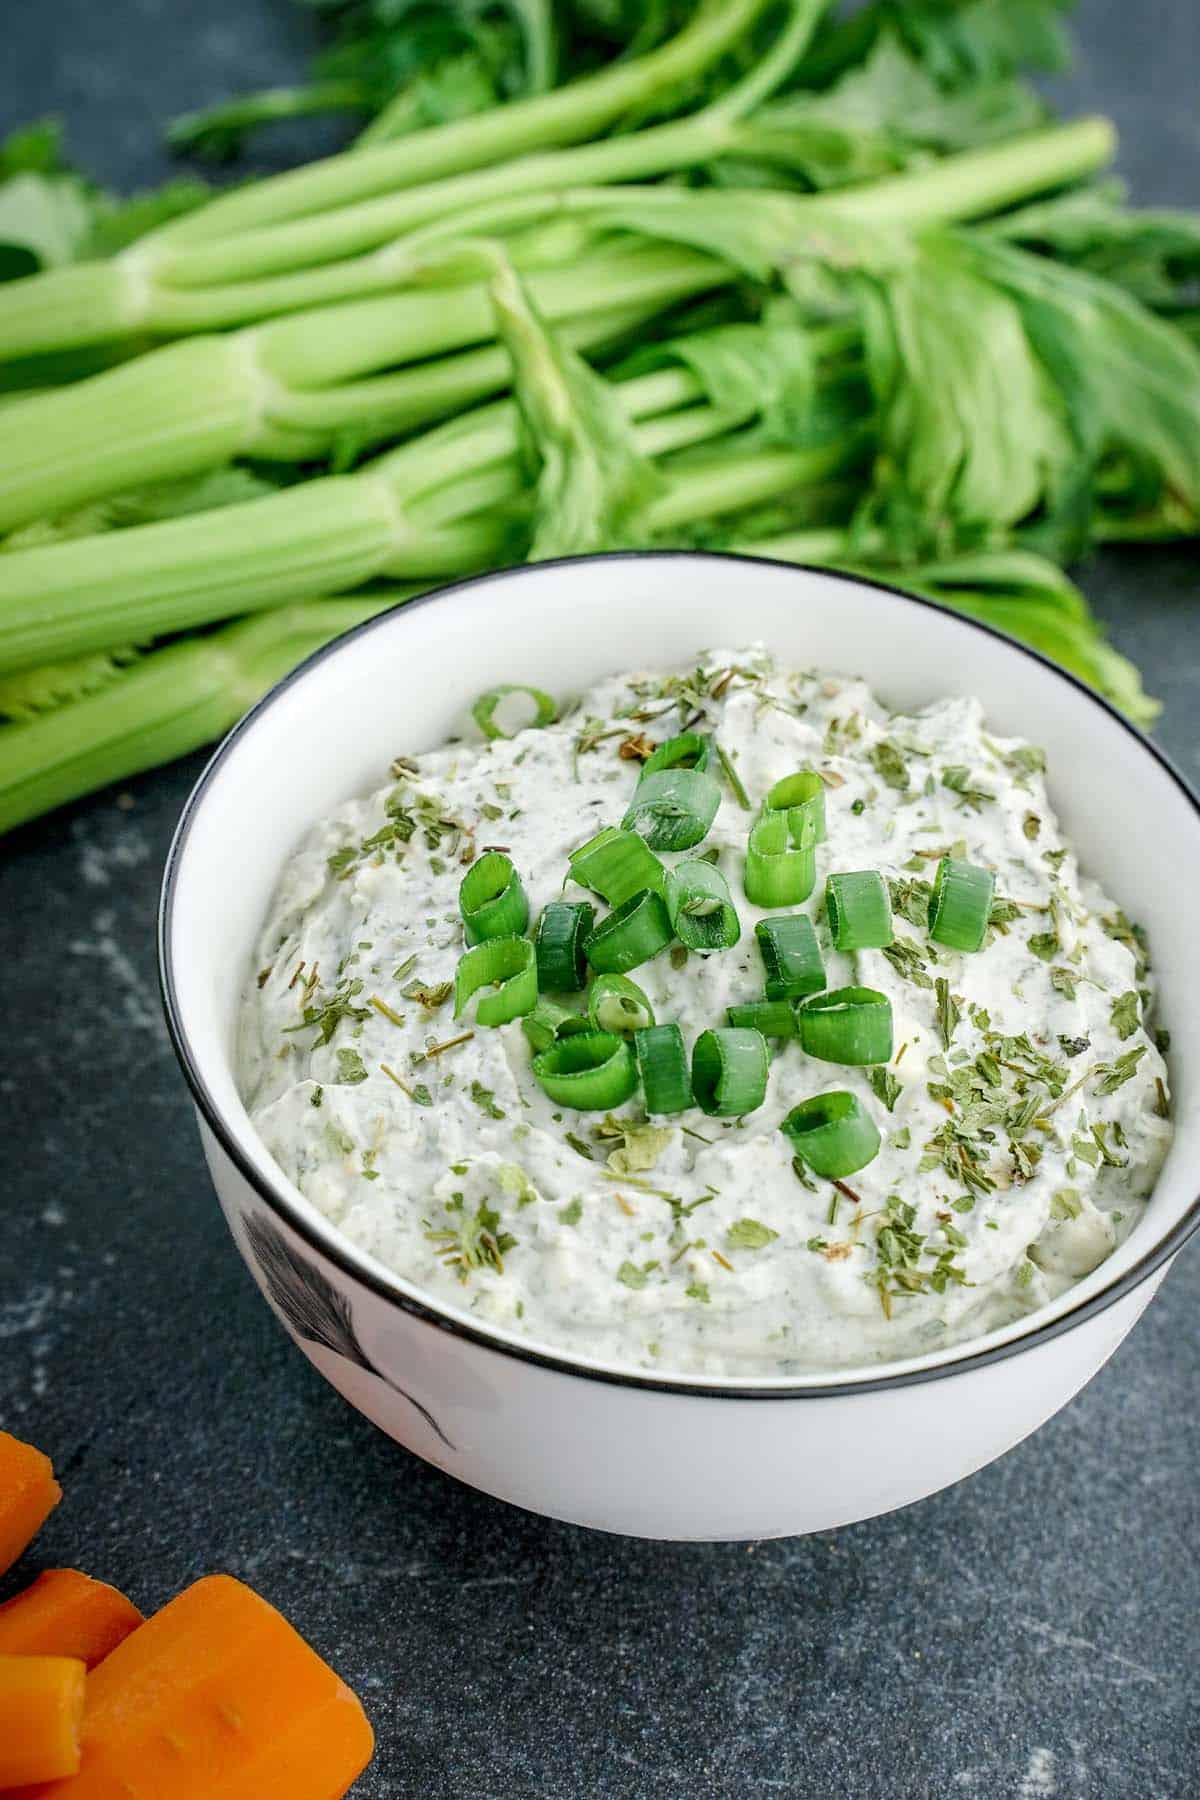 blue cheese dip in a bowl with celery